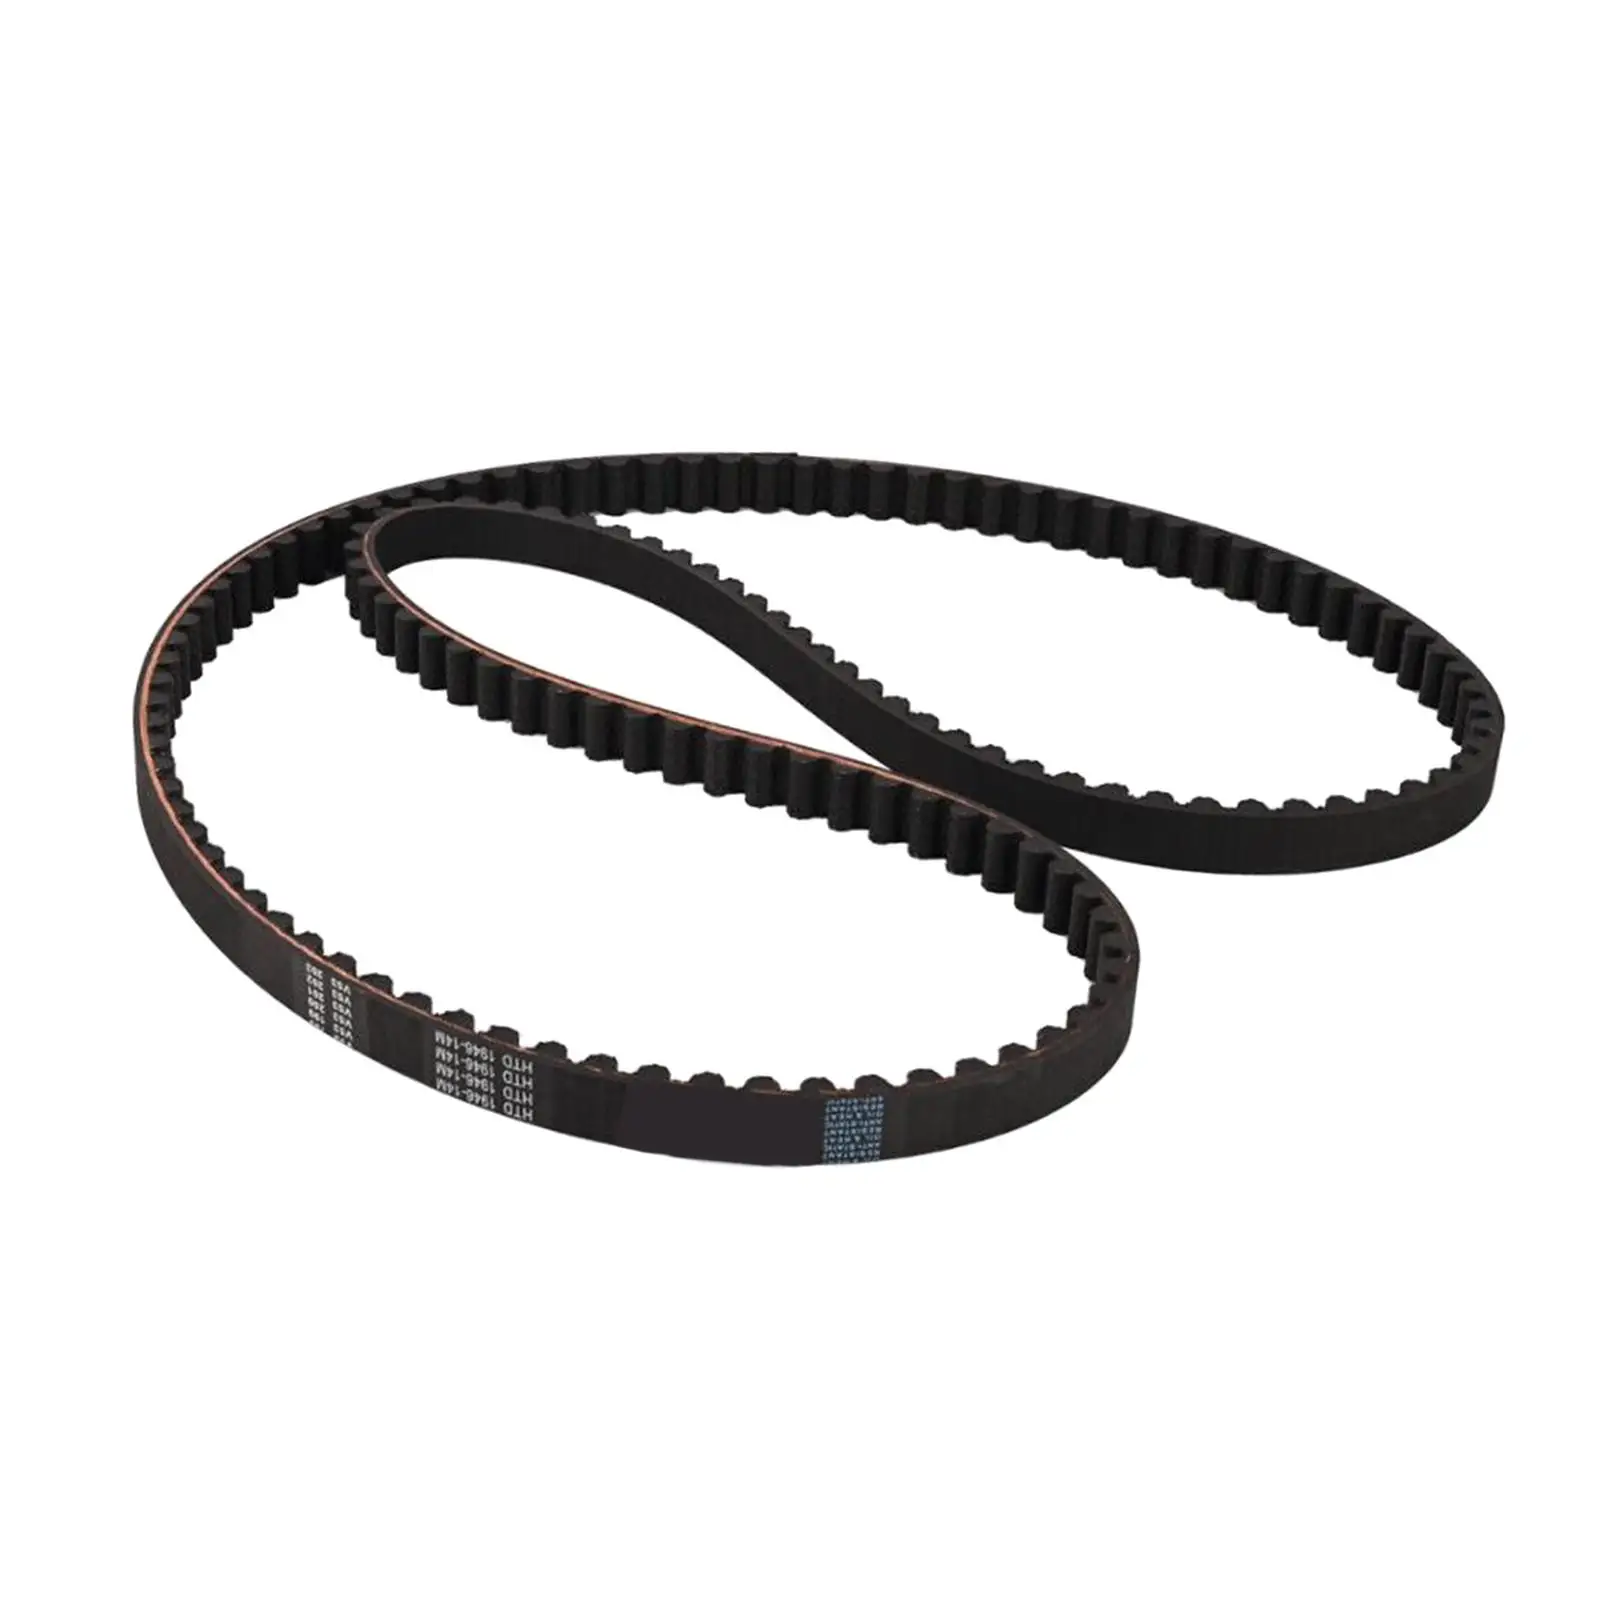 Rear Drive Belt 1204-0053 Professional Durable 40073-07 20mm for Softail FX fl